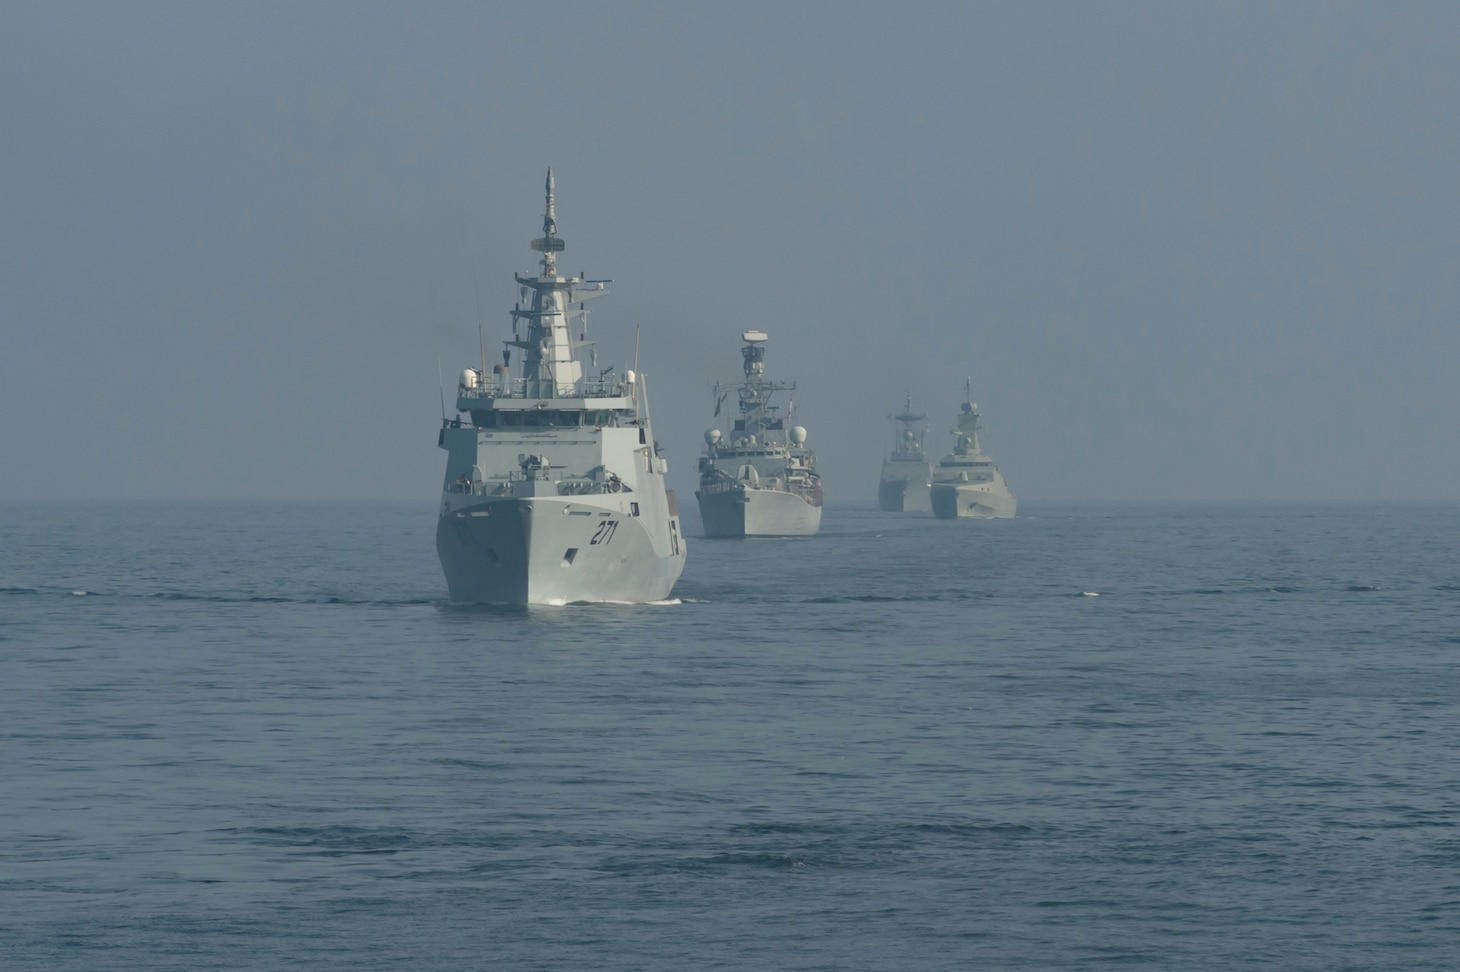 230315-N-NH267-1011 GULF OF OMAN (March 15, 2023) Ships sail in formation, March 15, 2023, in the Gulf of Oman during International Maritime Exercise 2023. IMX/CE 2023 is the largest multinational training event in the Middle East, involving 7,000 personnel from more than 50 nations and international organizations committed to preserving the rules-based international order and strengthening regional maritime security cooperation. (U.S. Navy photo by Mass Communication Specialist 2nd Class Elliot Schaudt)